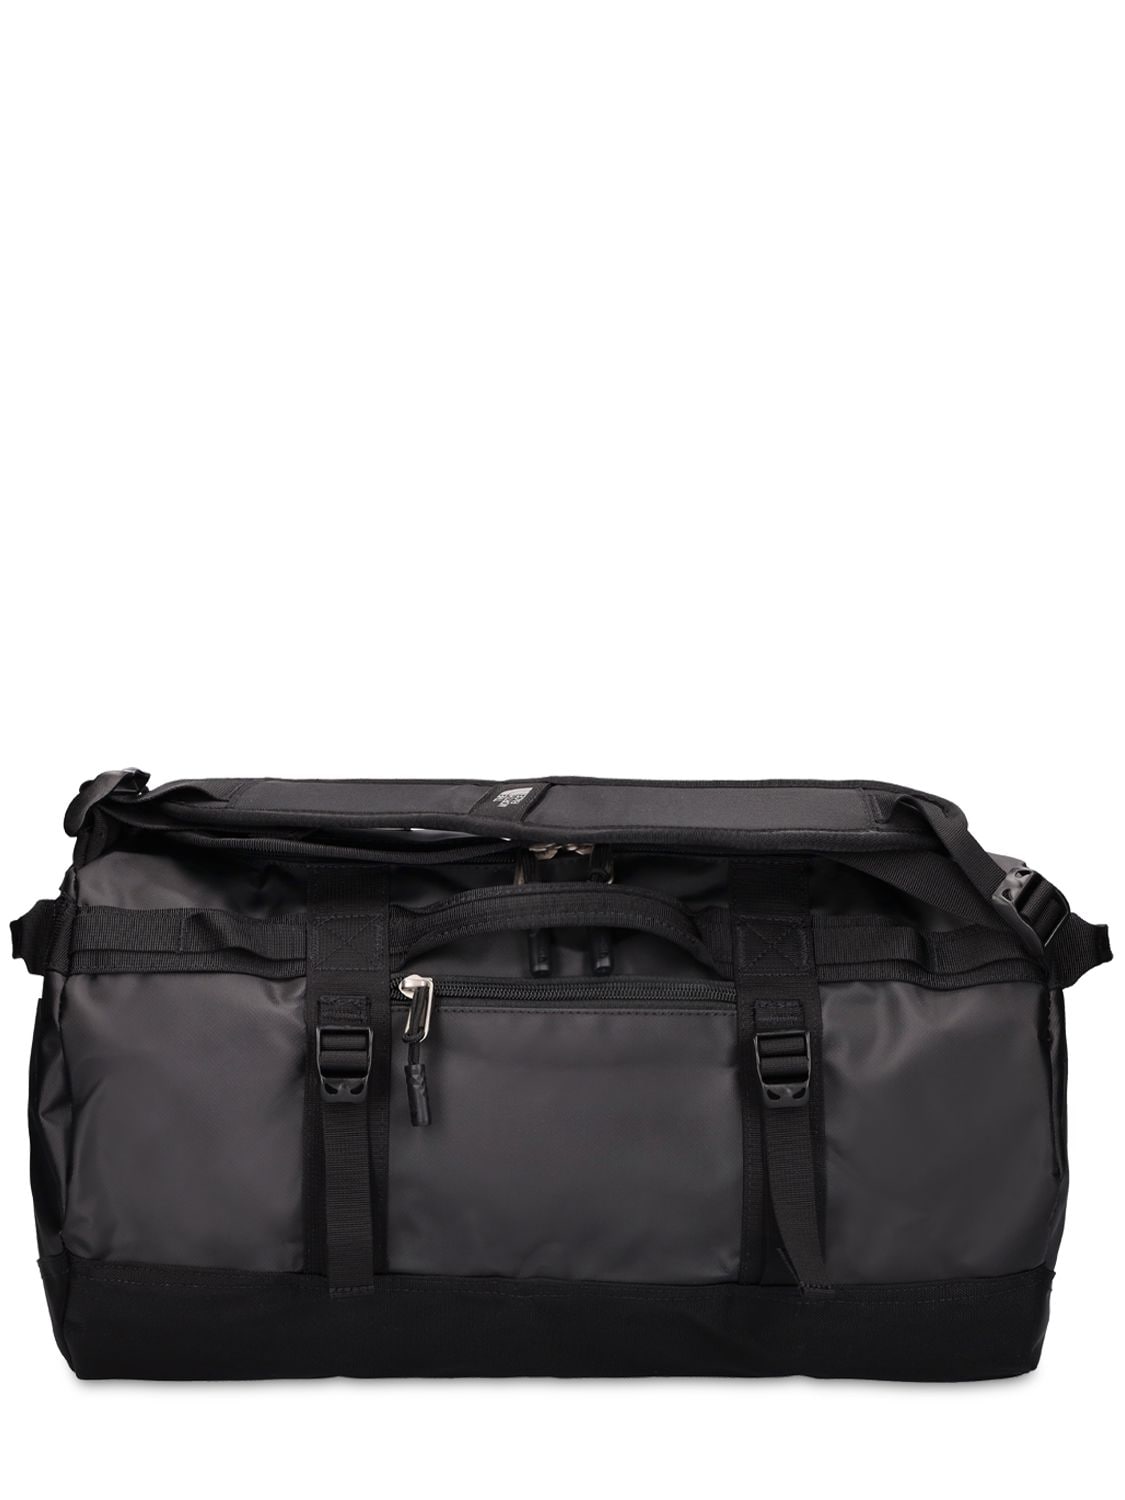 The North Face 31l Base Camp Duffle Bag In Black | ModeSens